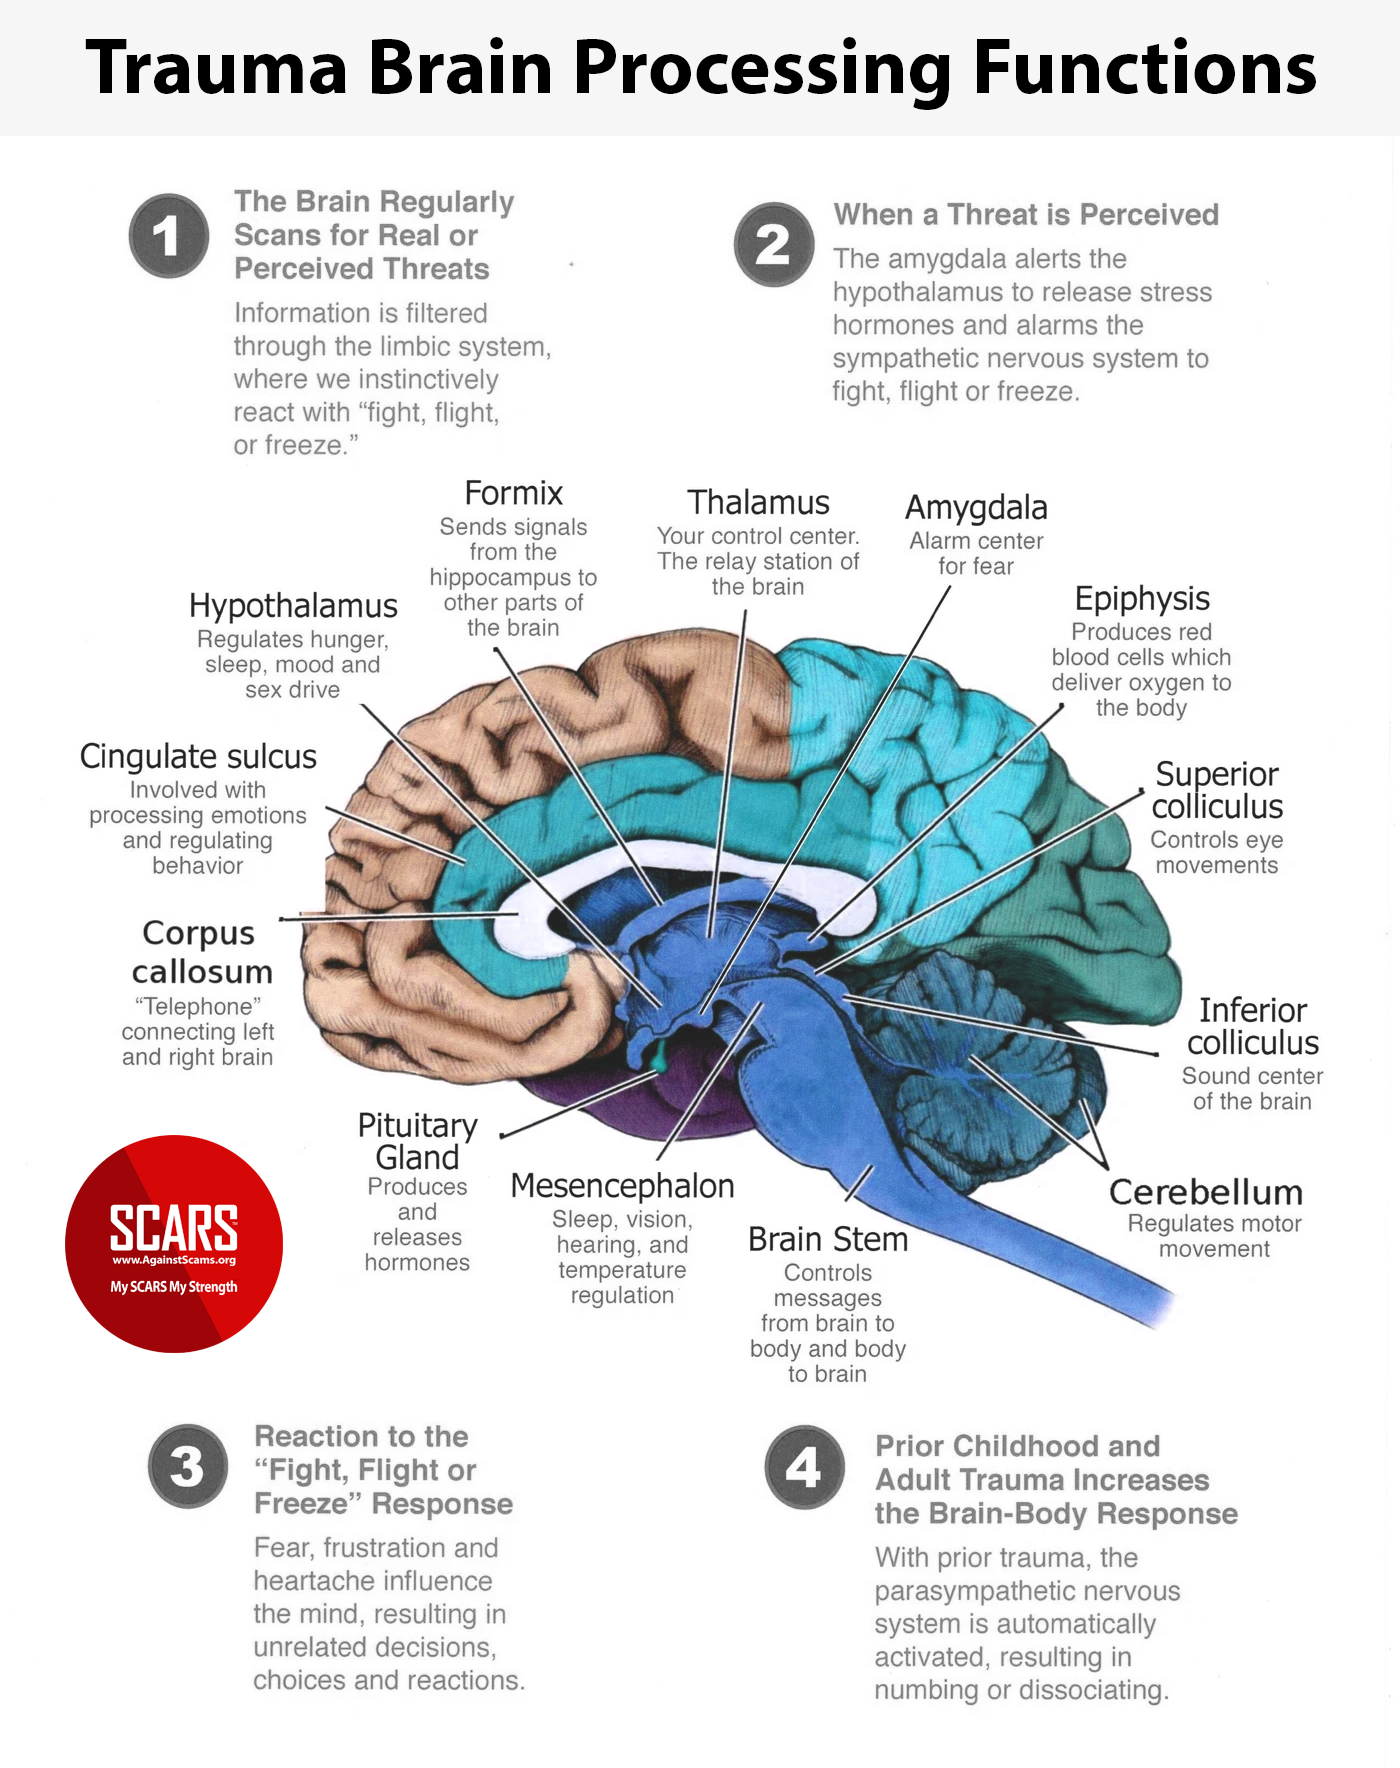 Trauma - Brain Processing Functions - Infographic 46